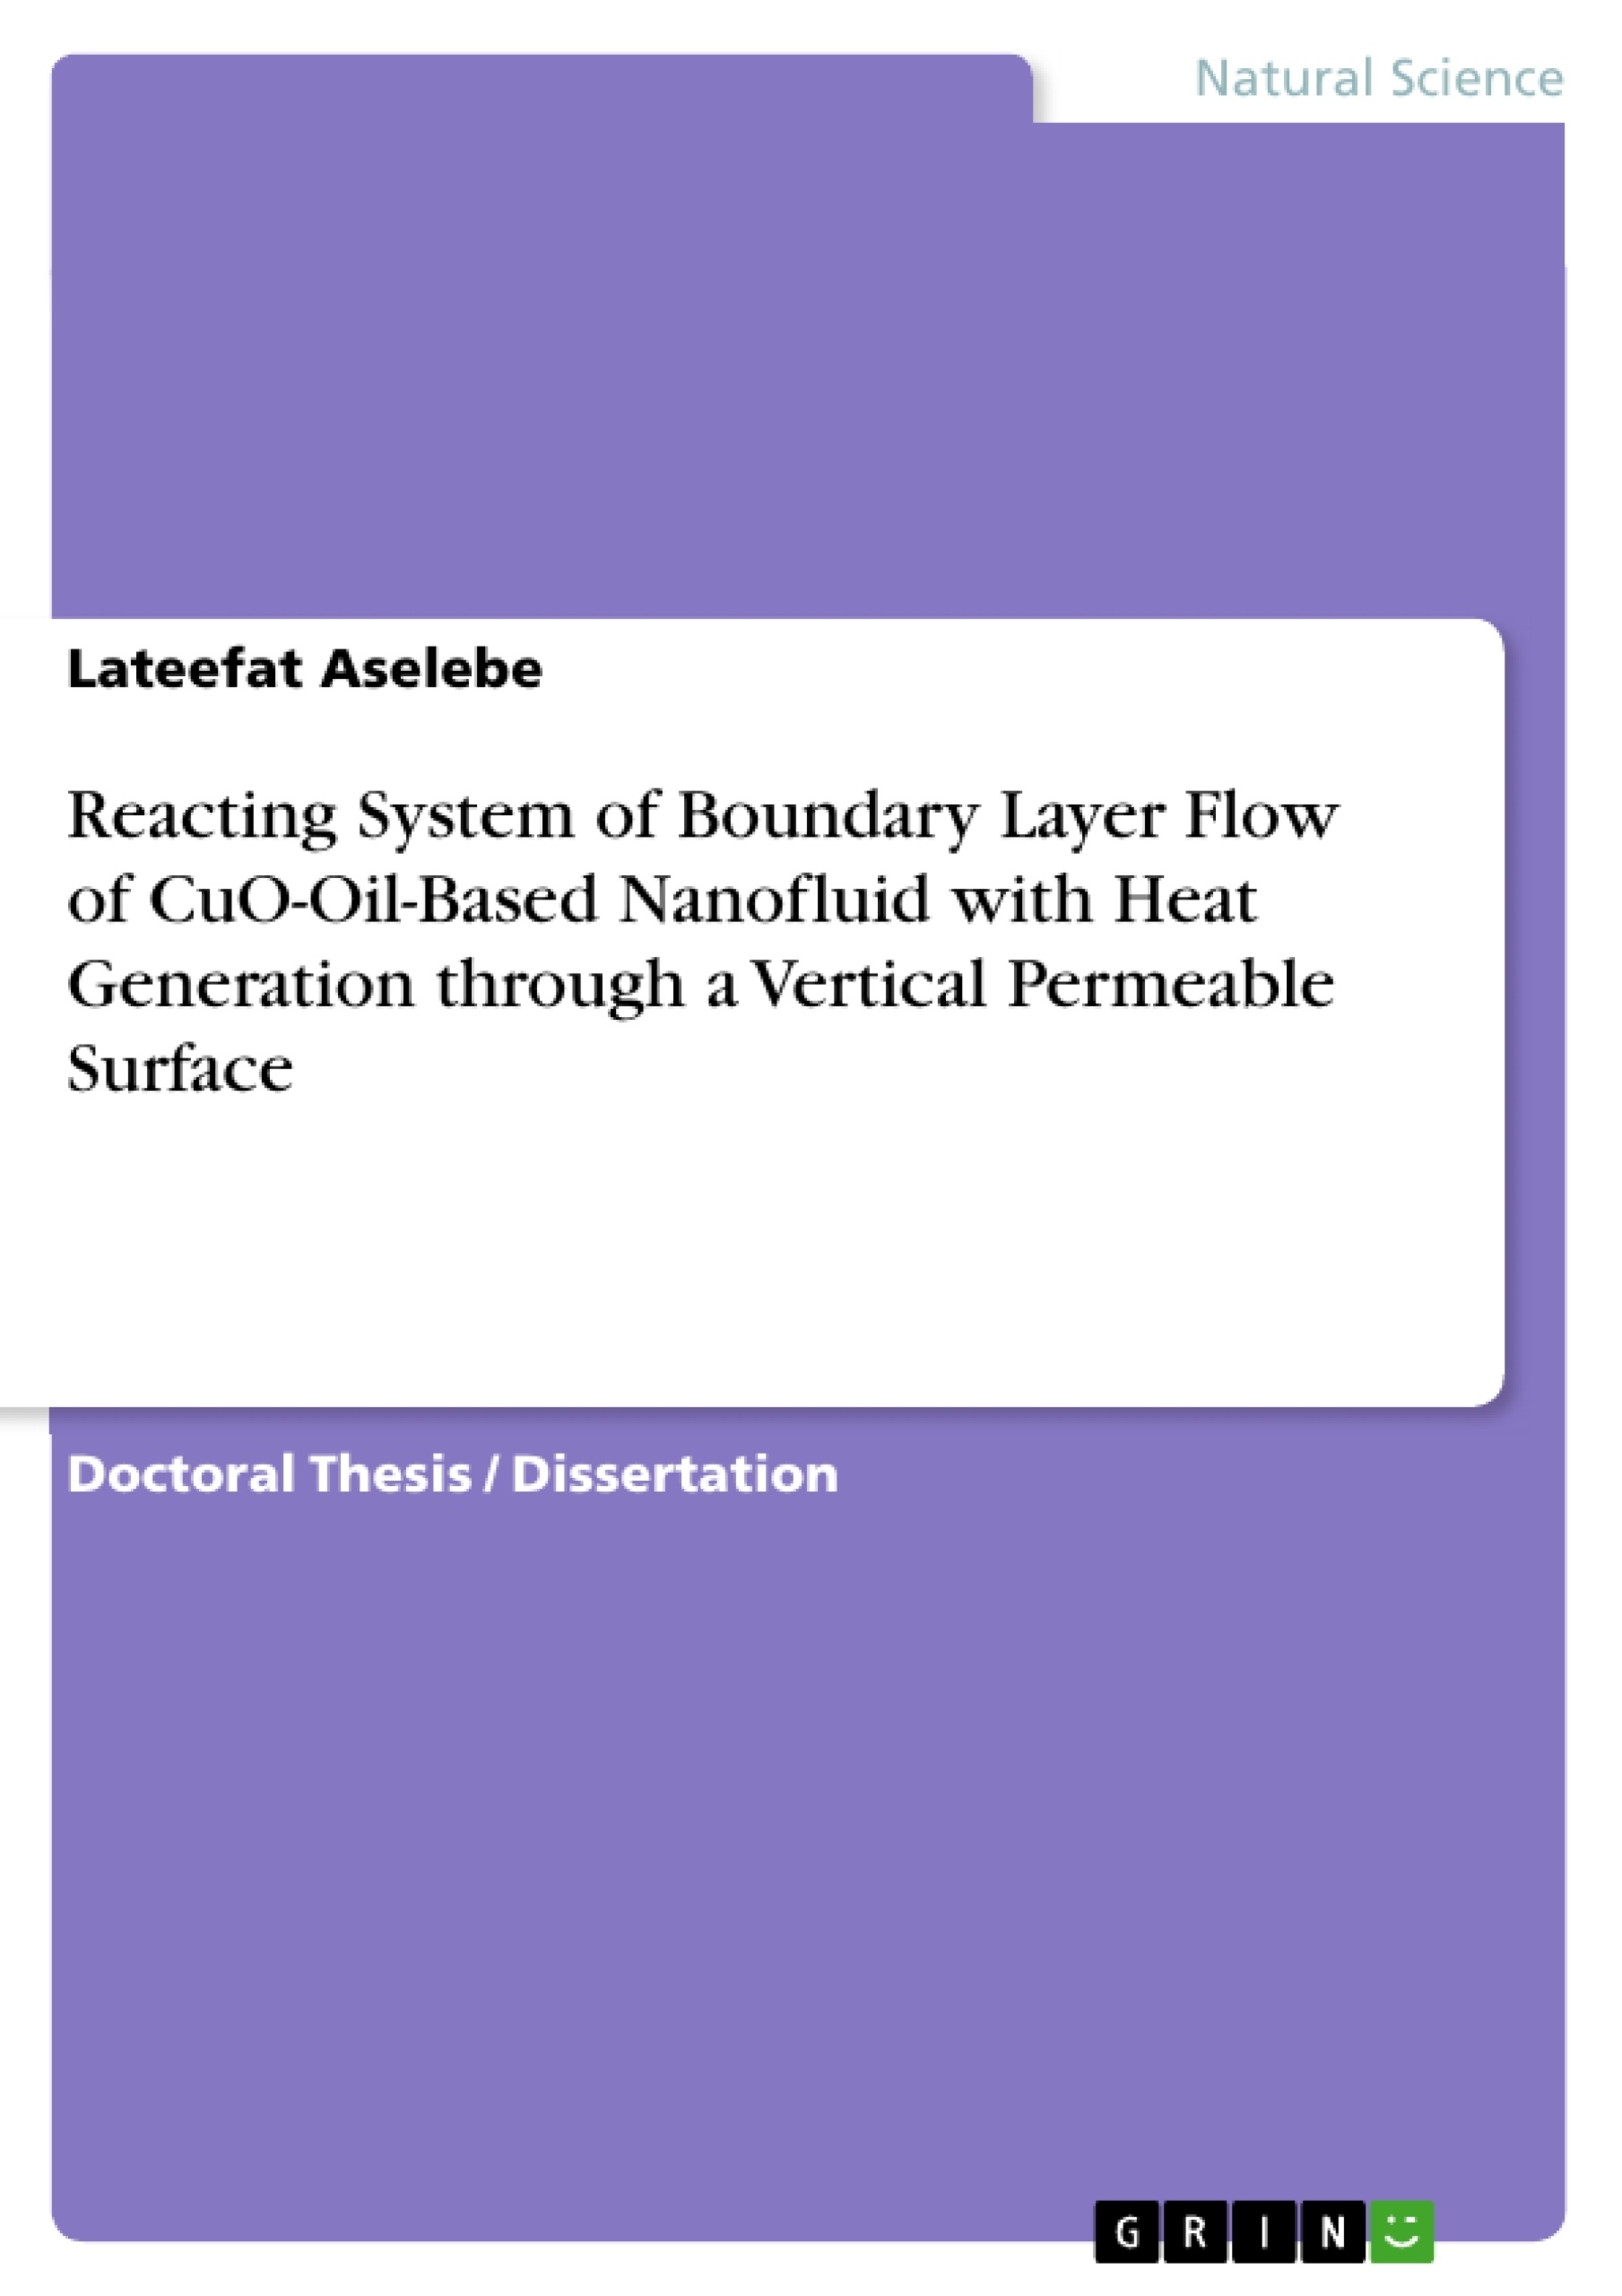 Title: Reacting System of Boundary Layer Flow of CuO-Oil-Based Nanofluid with Heat Generation through a Vertical Permeable Surface